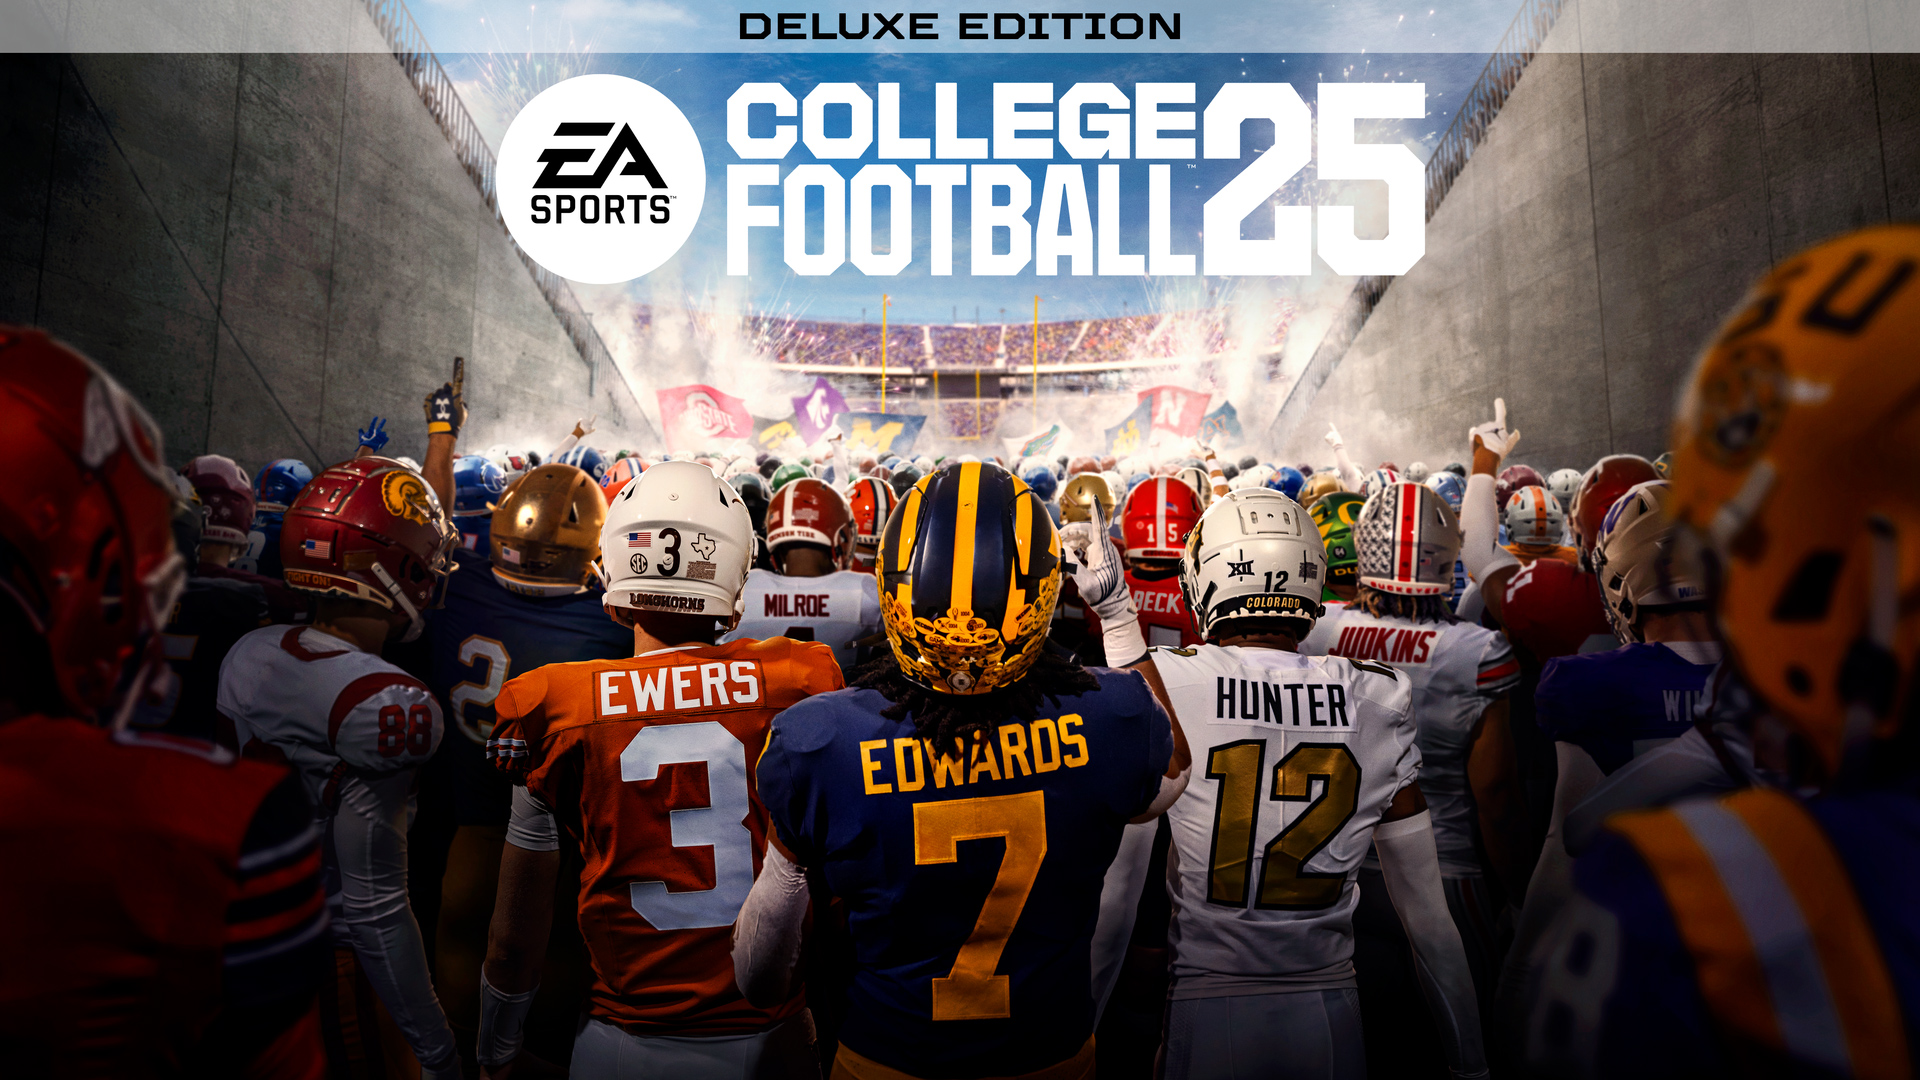 College Football is finally coming back to video games